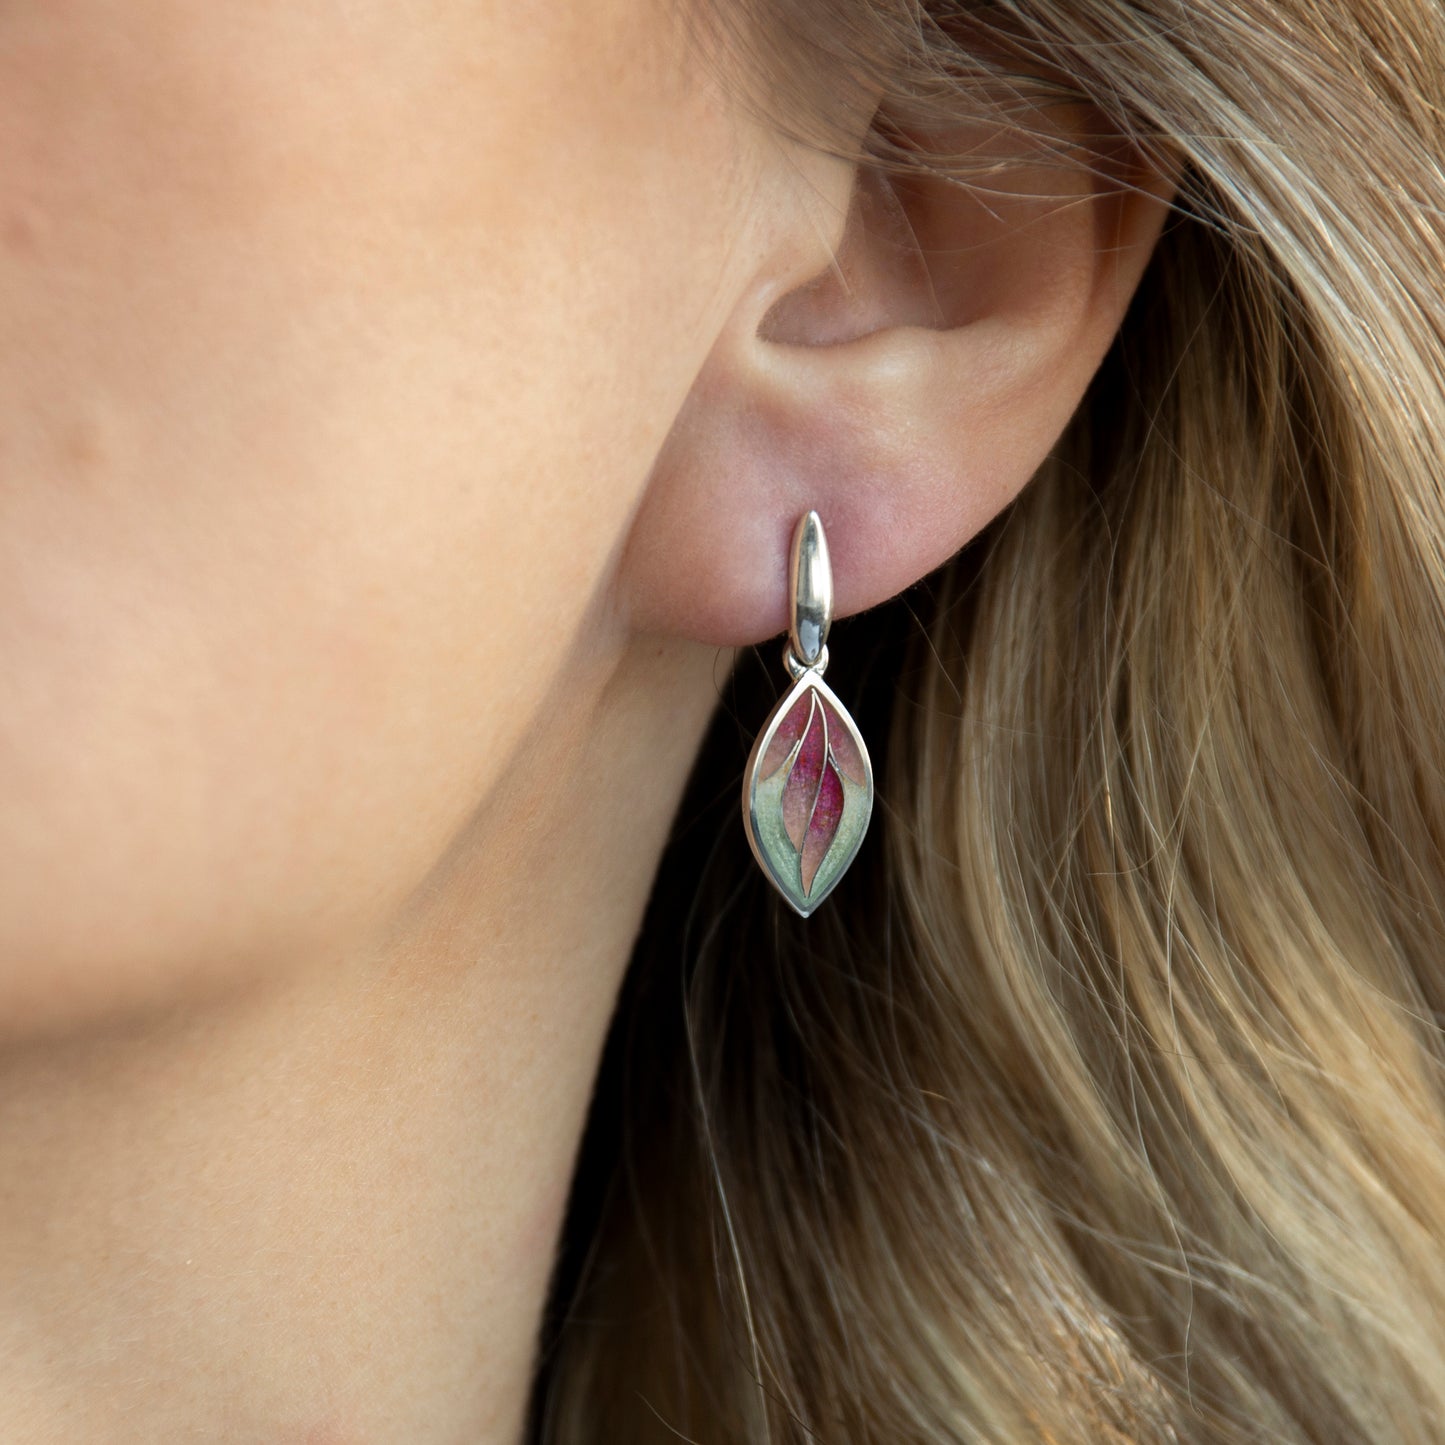 Pink Leaves Cloisonné Enamel and Sterling Silver Earrings